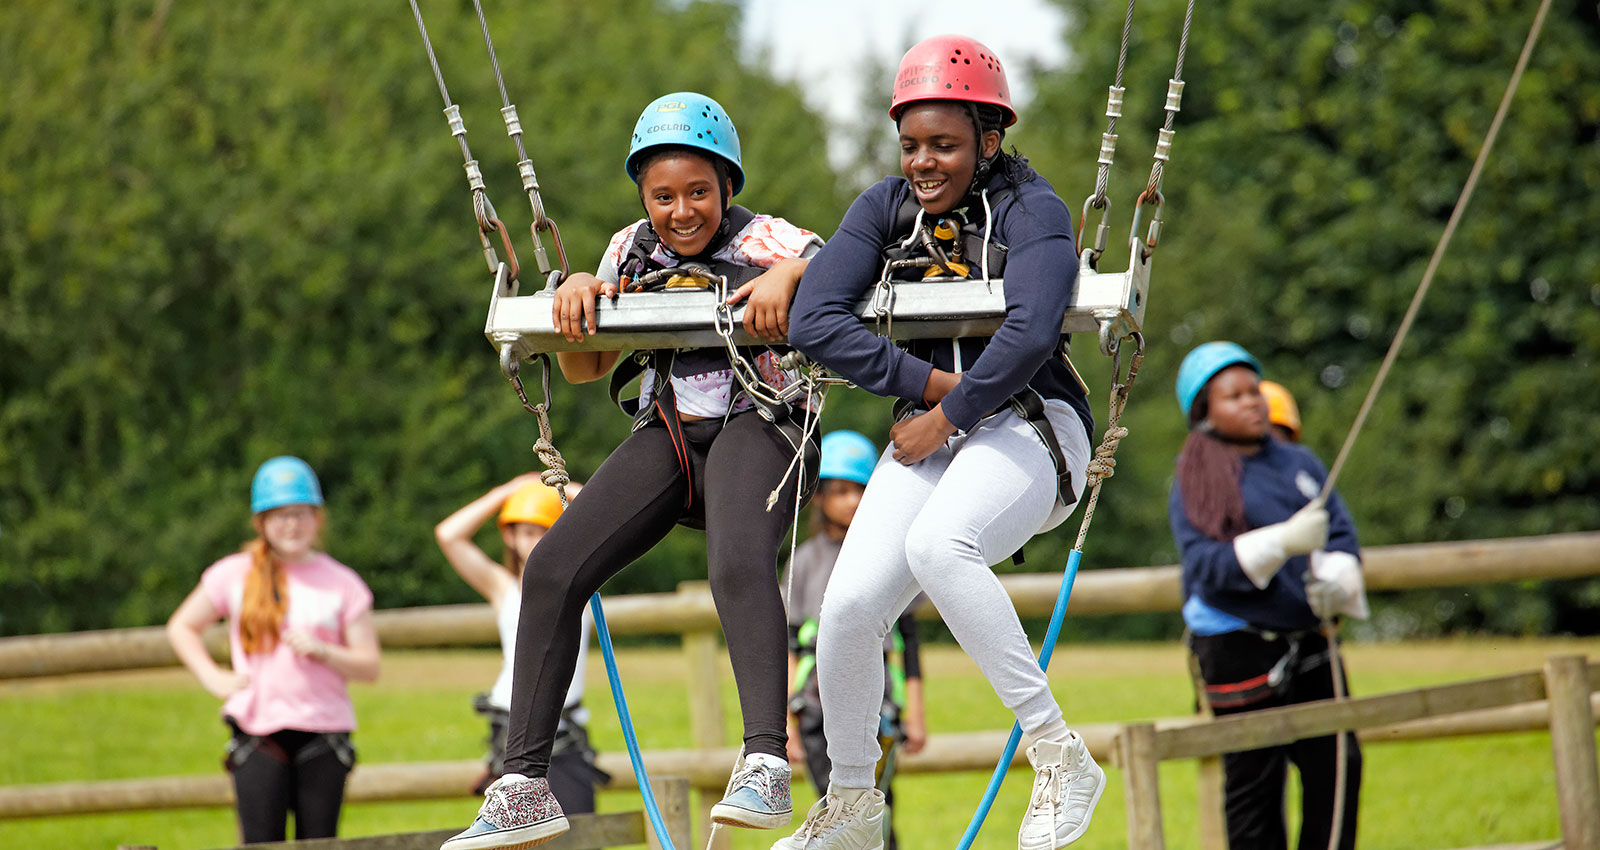 Summer residential offers youth groups